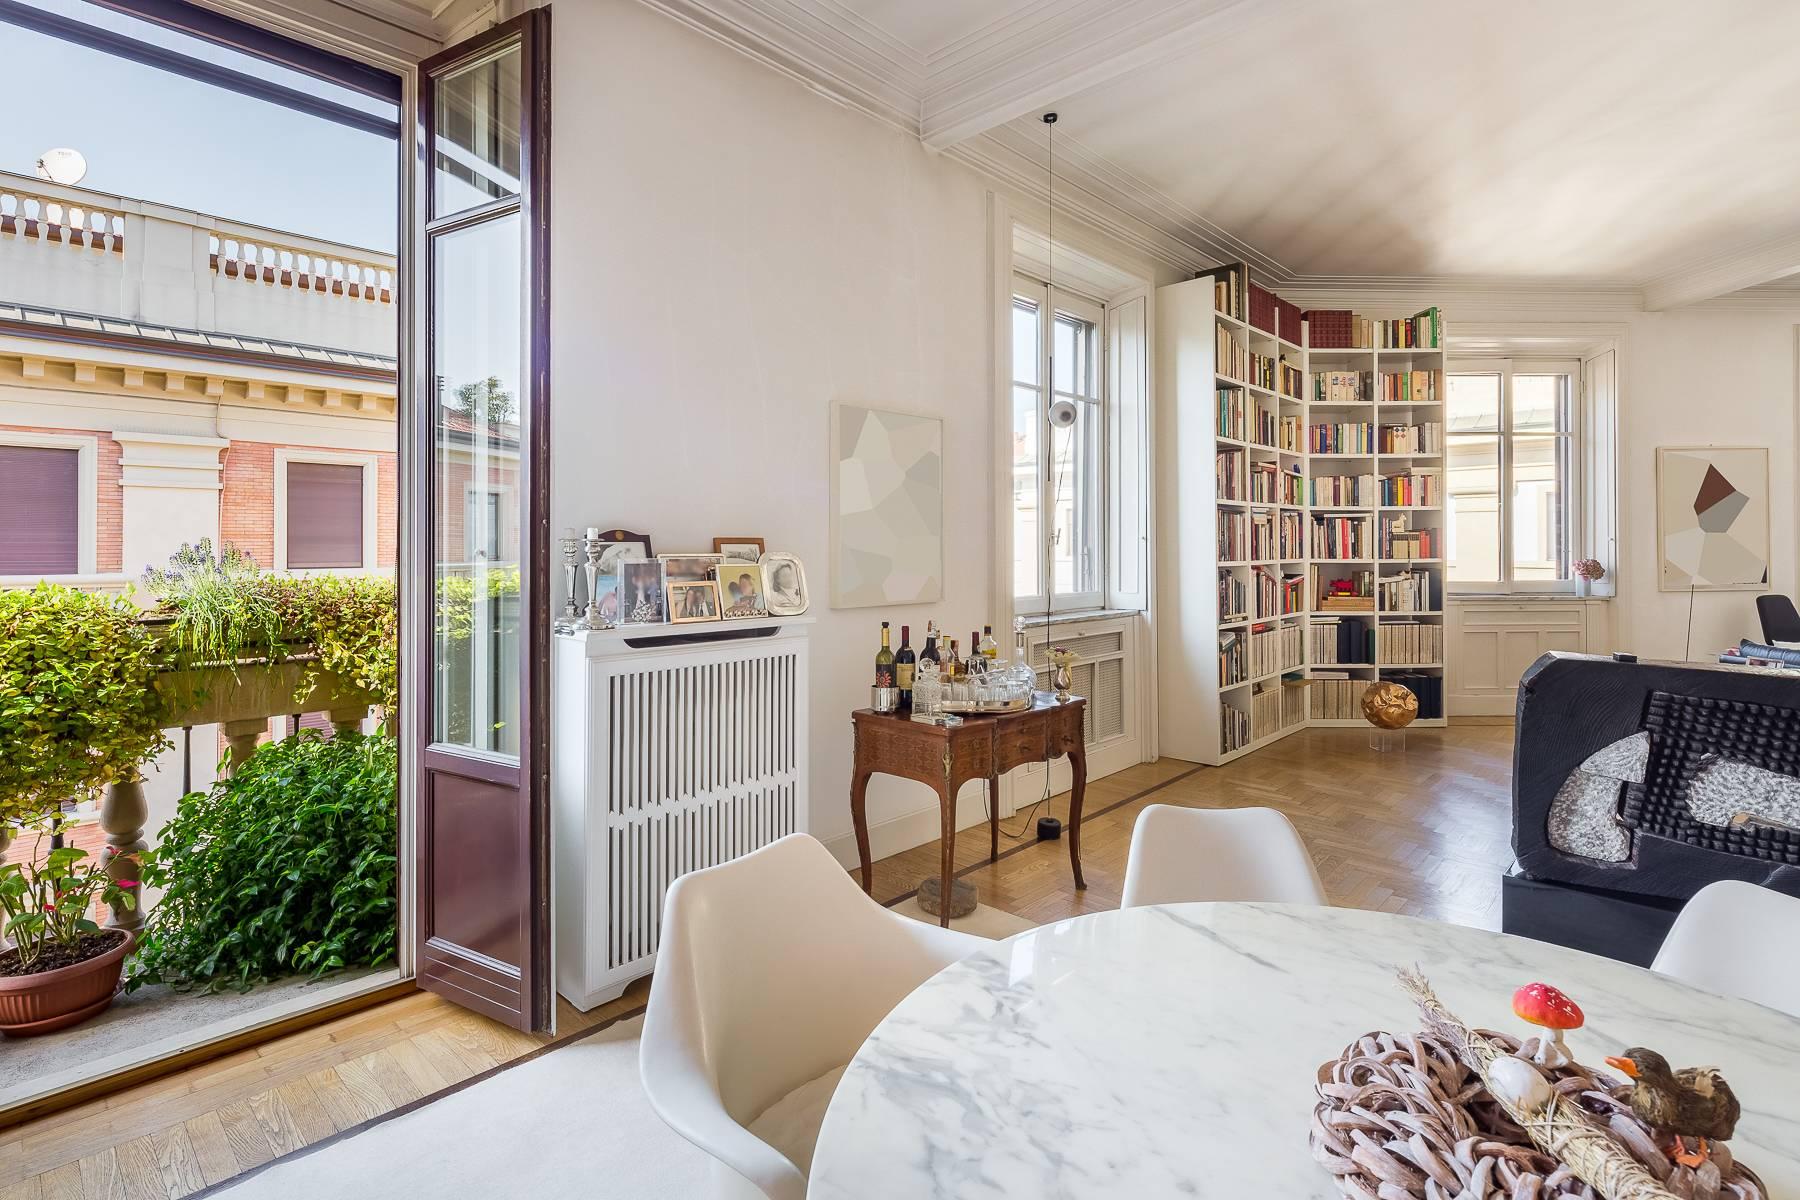 Exclusive 200-sqm apartment in bare ownership in a period building - 2